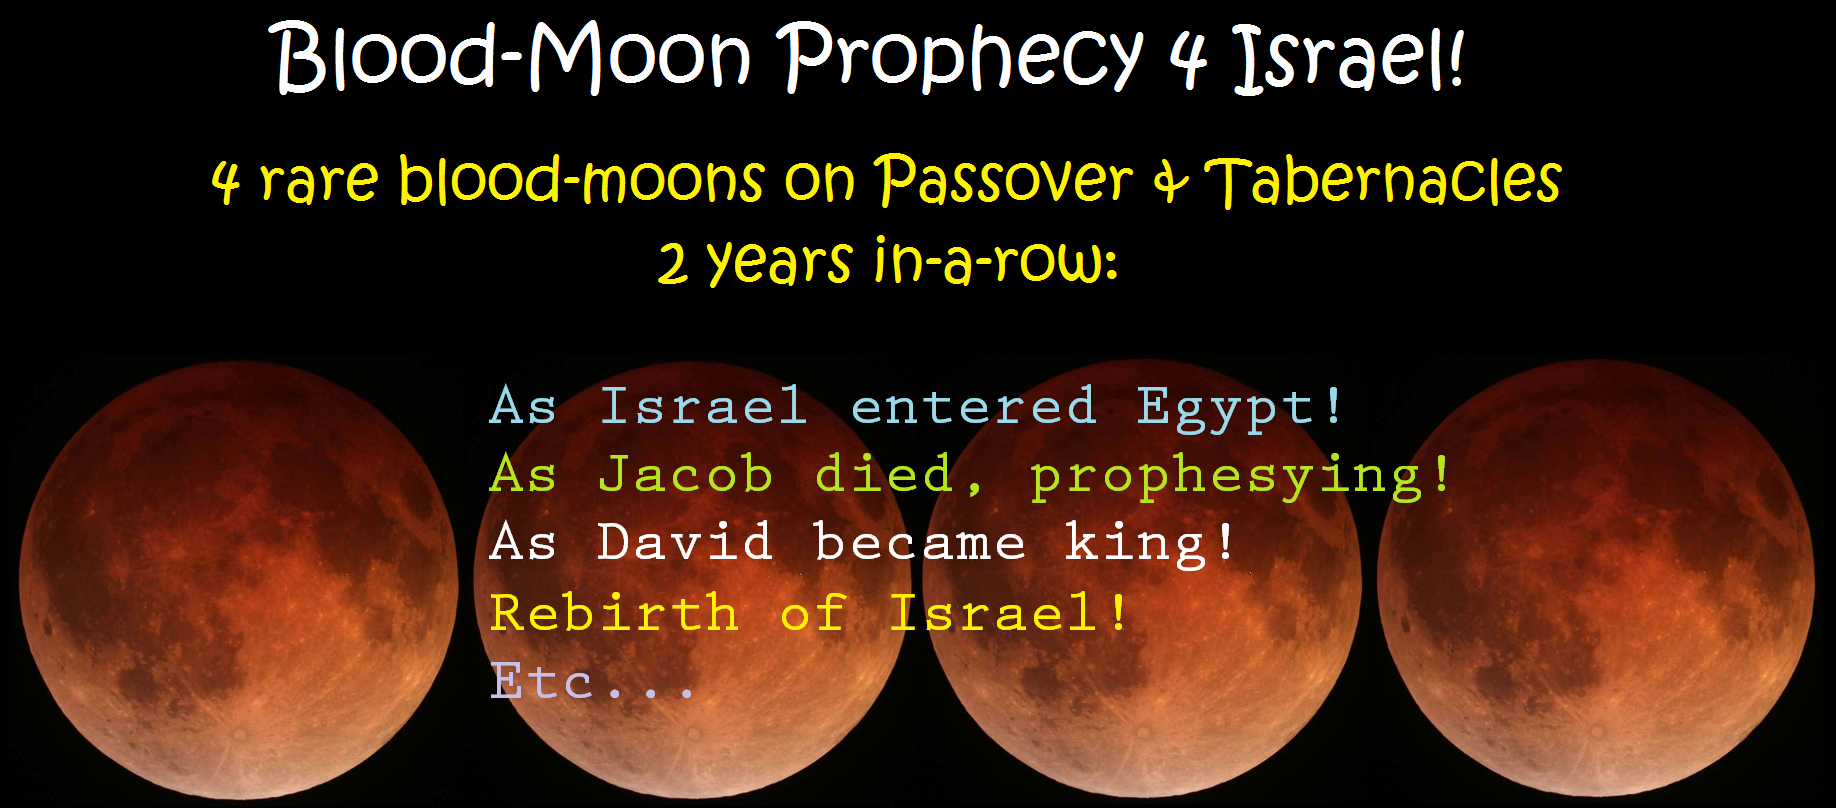 Blood Moon Prophecy 4 Israel Lunar Eclipse Tetrads On Passover